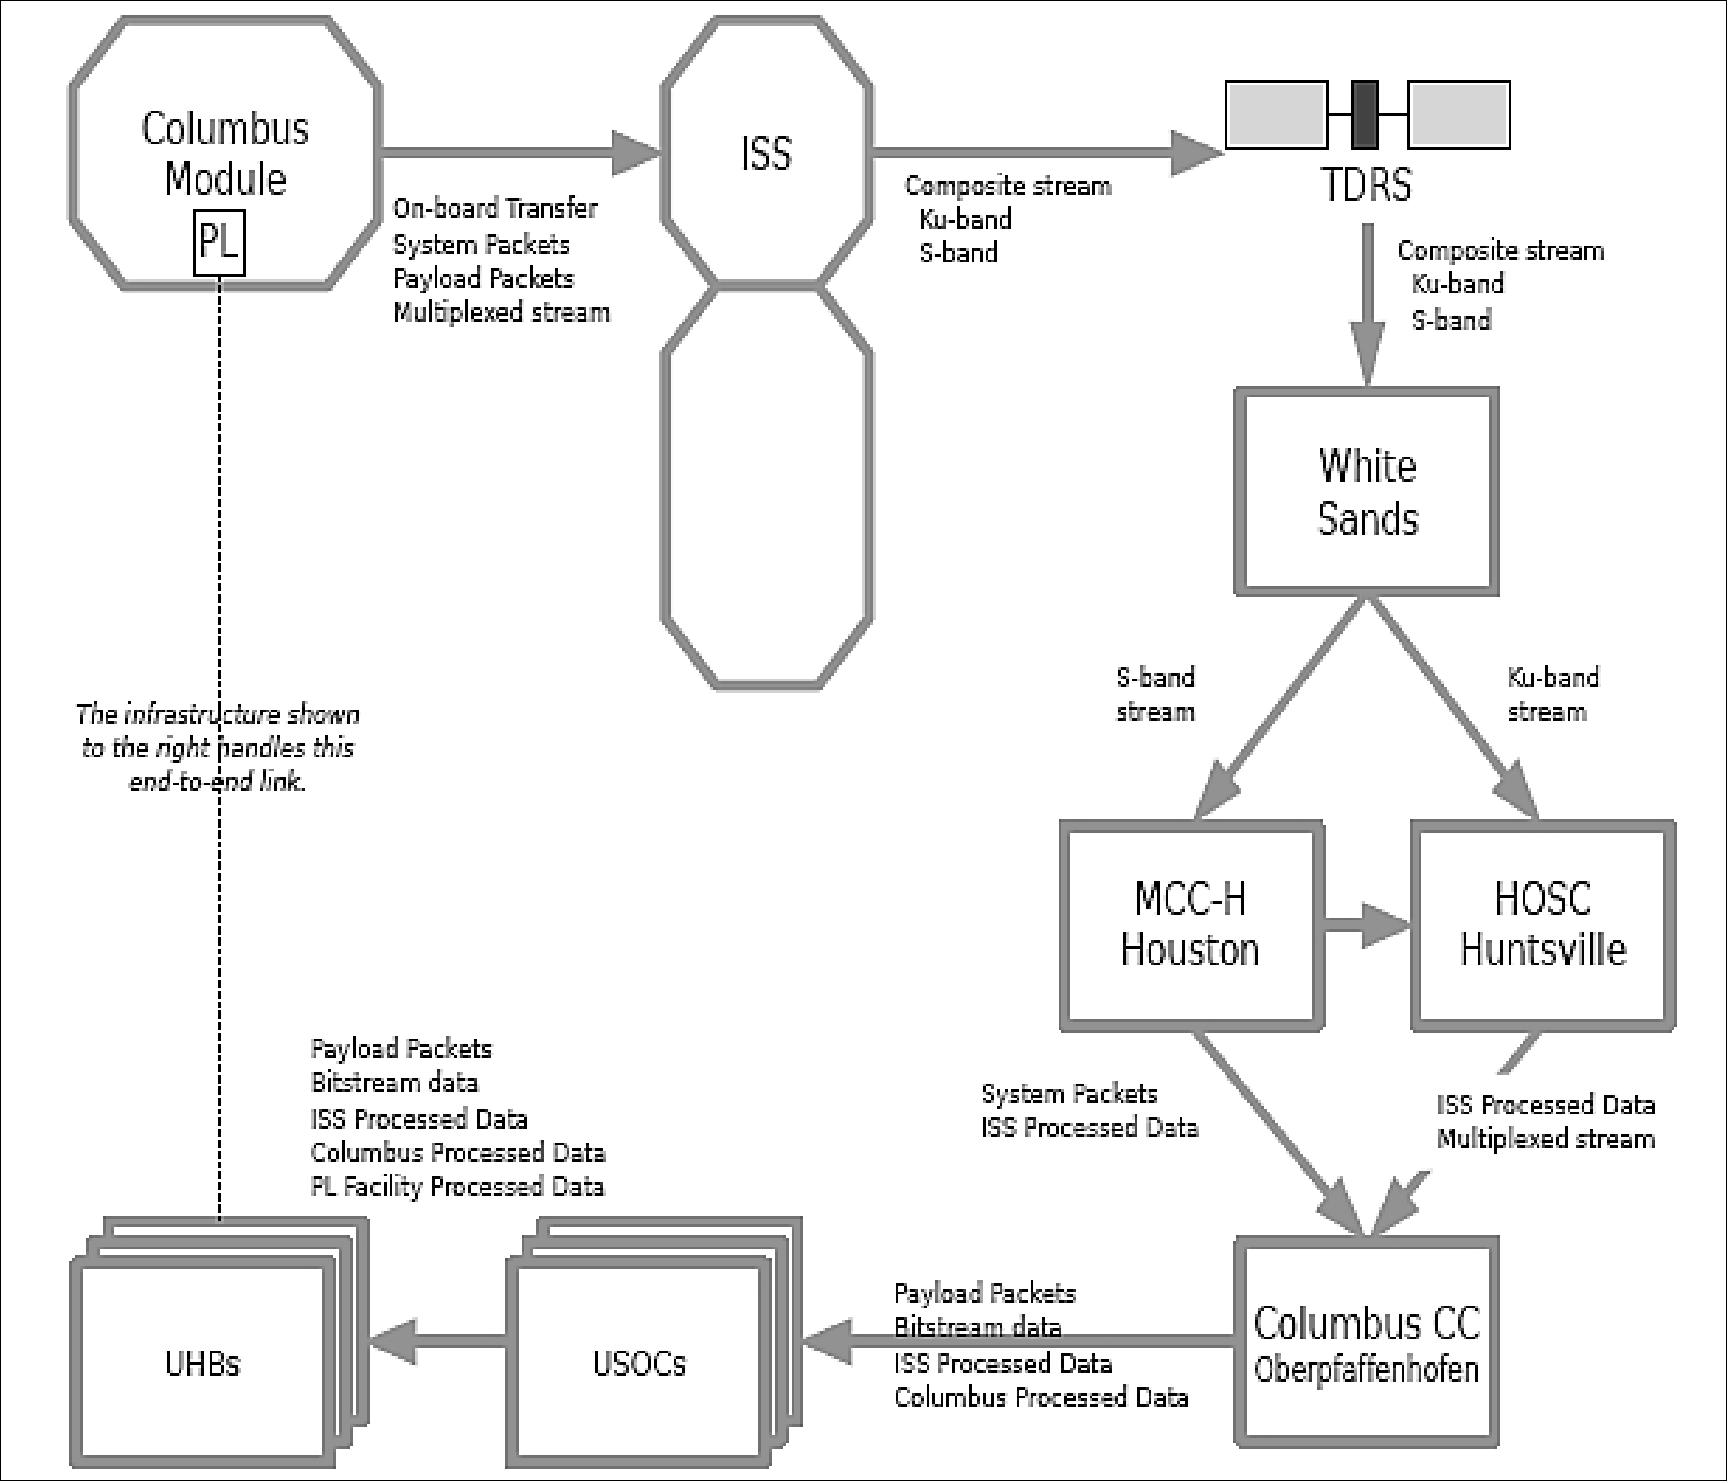 Figure 10: End-to-end data flow of the Columbus module (image credit: DLR)